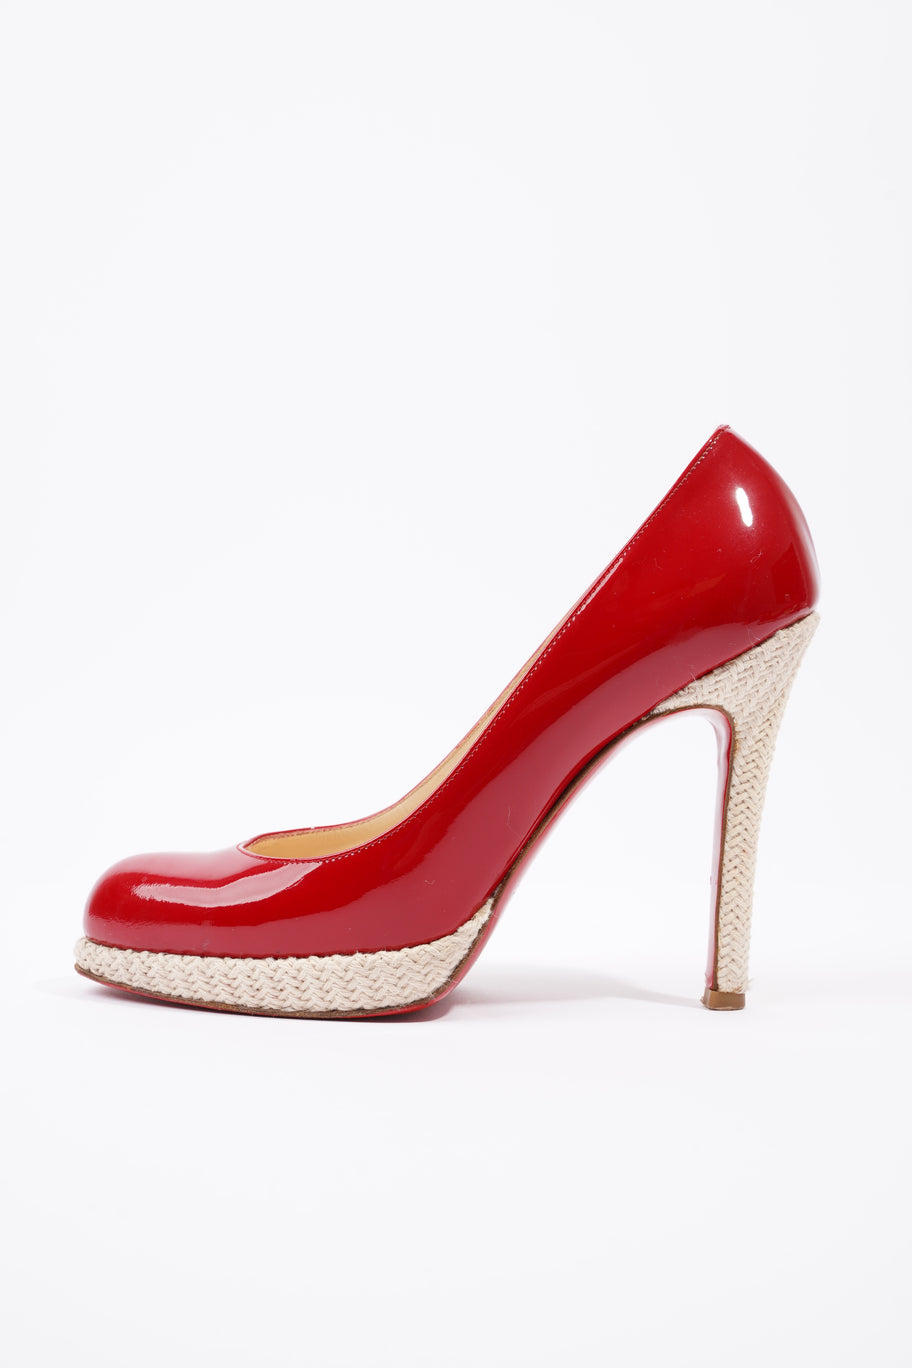 New Simple Pump 120 Red Patent Leather EU 39 UK 6 Image 5